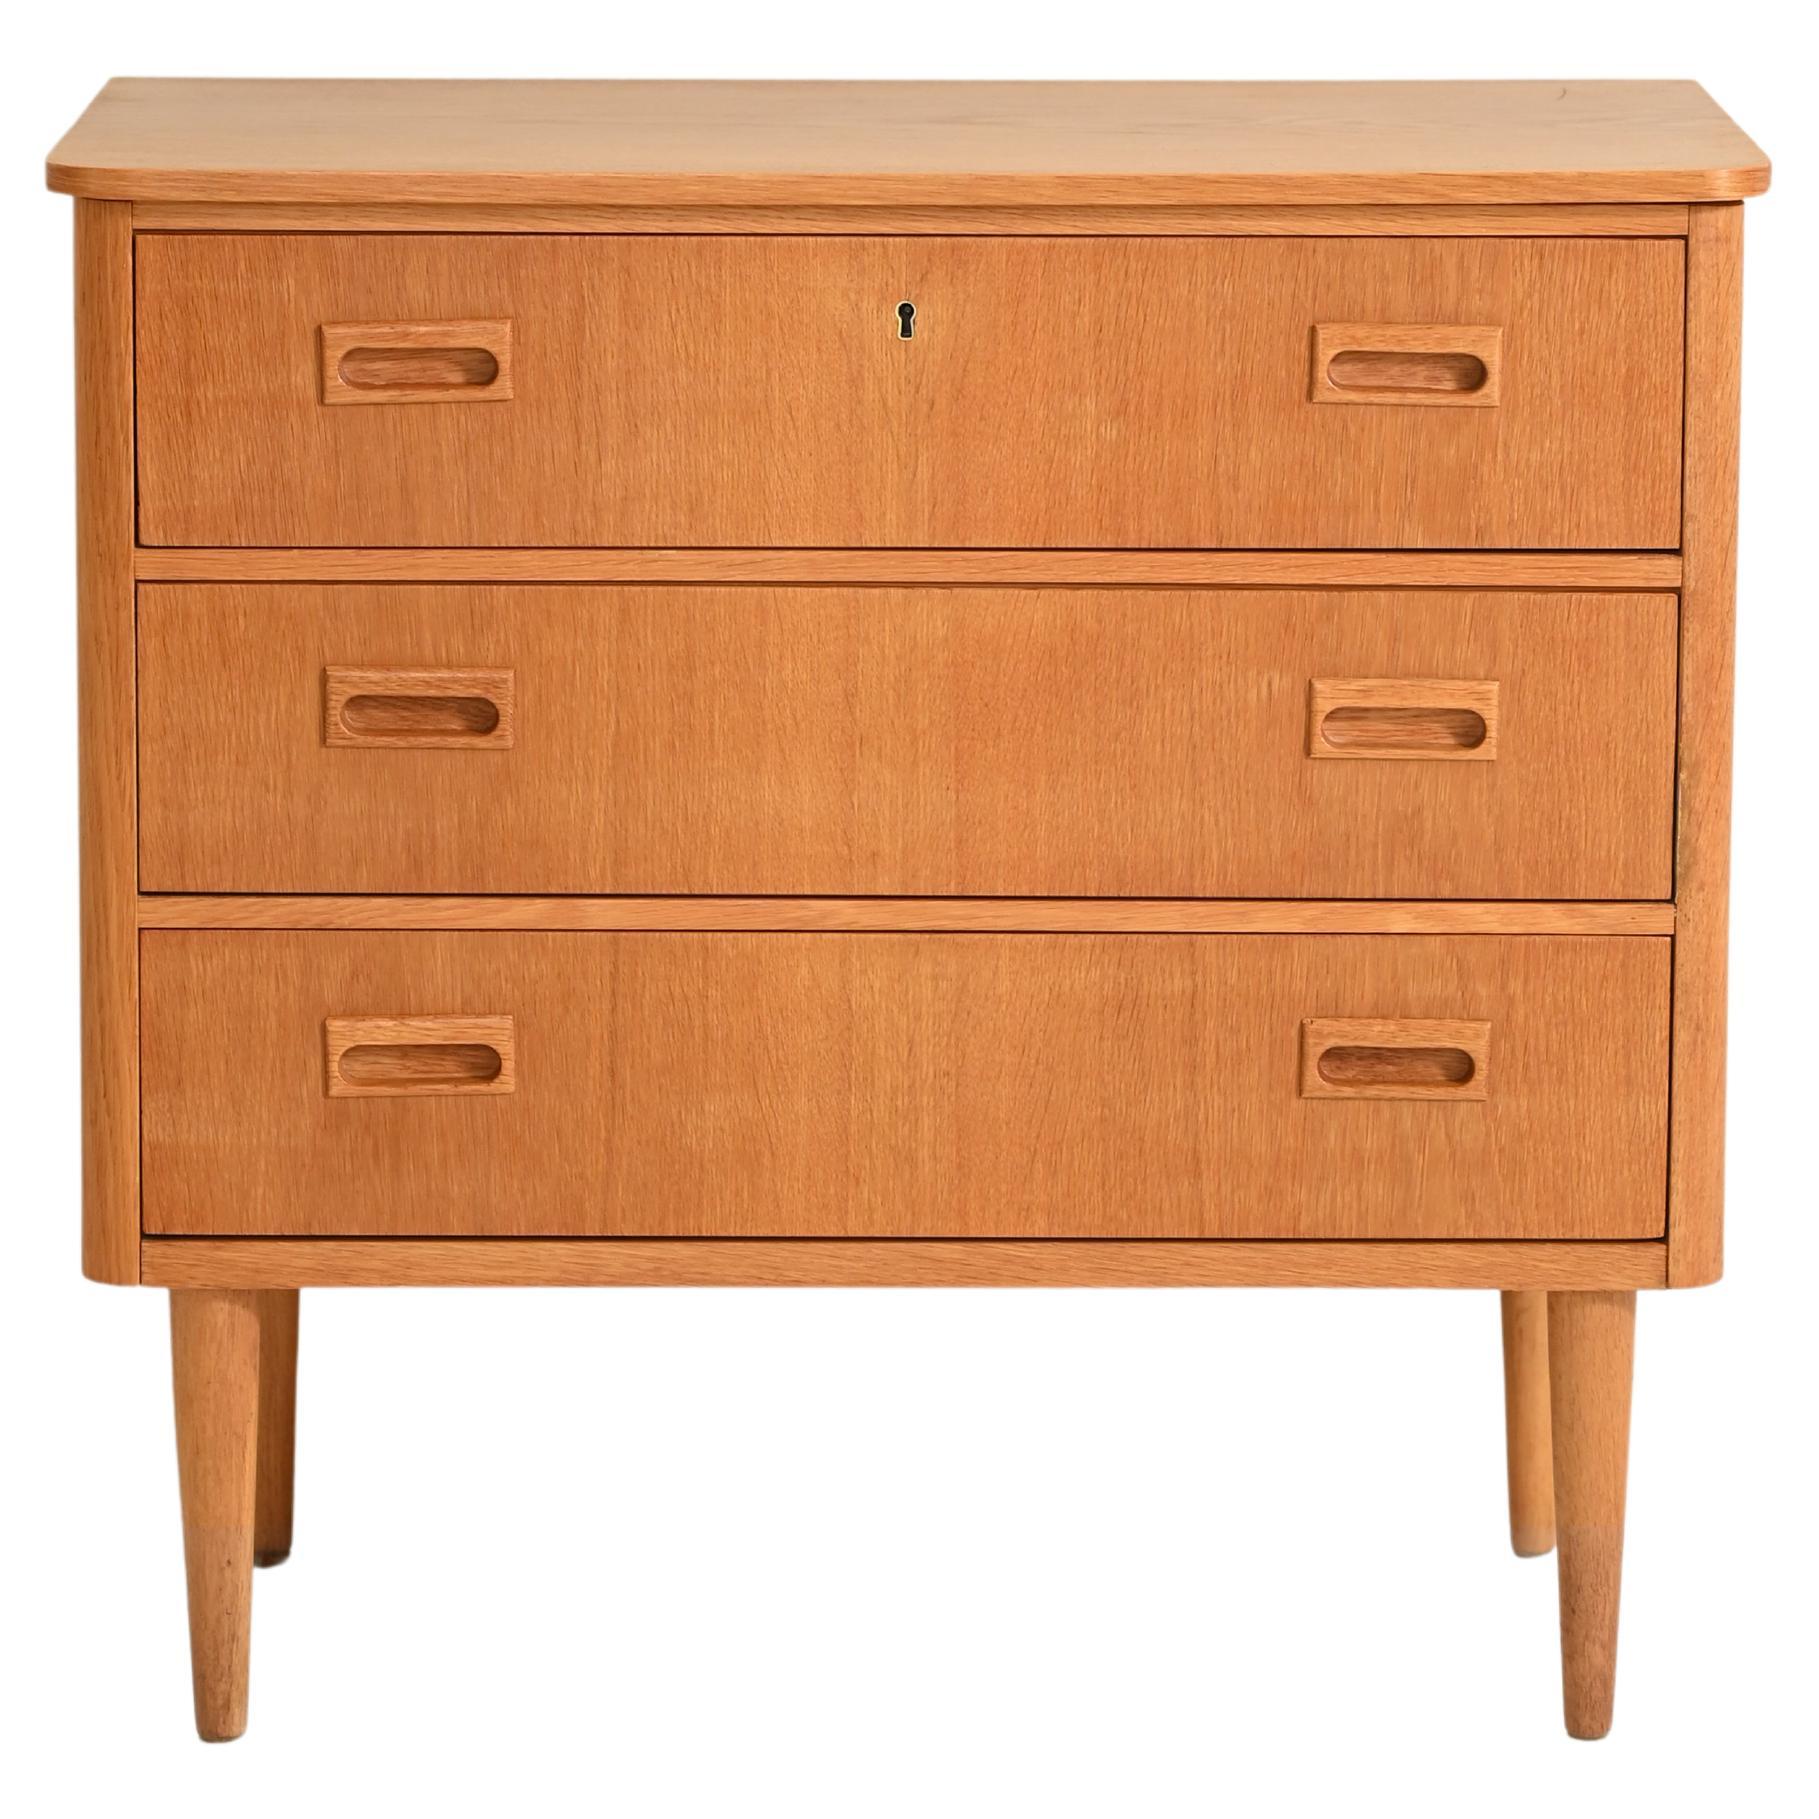 1960s Swedish chest of drawers with three drawers